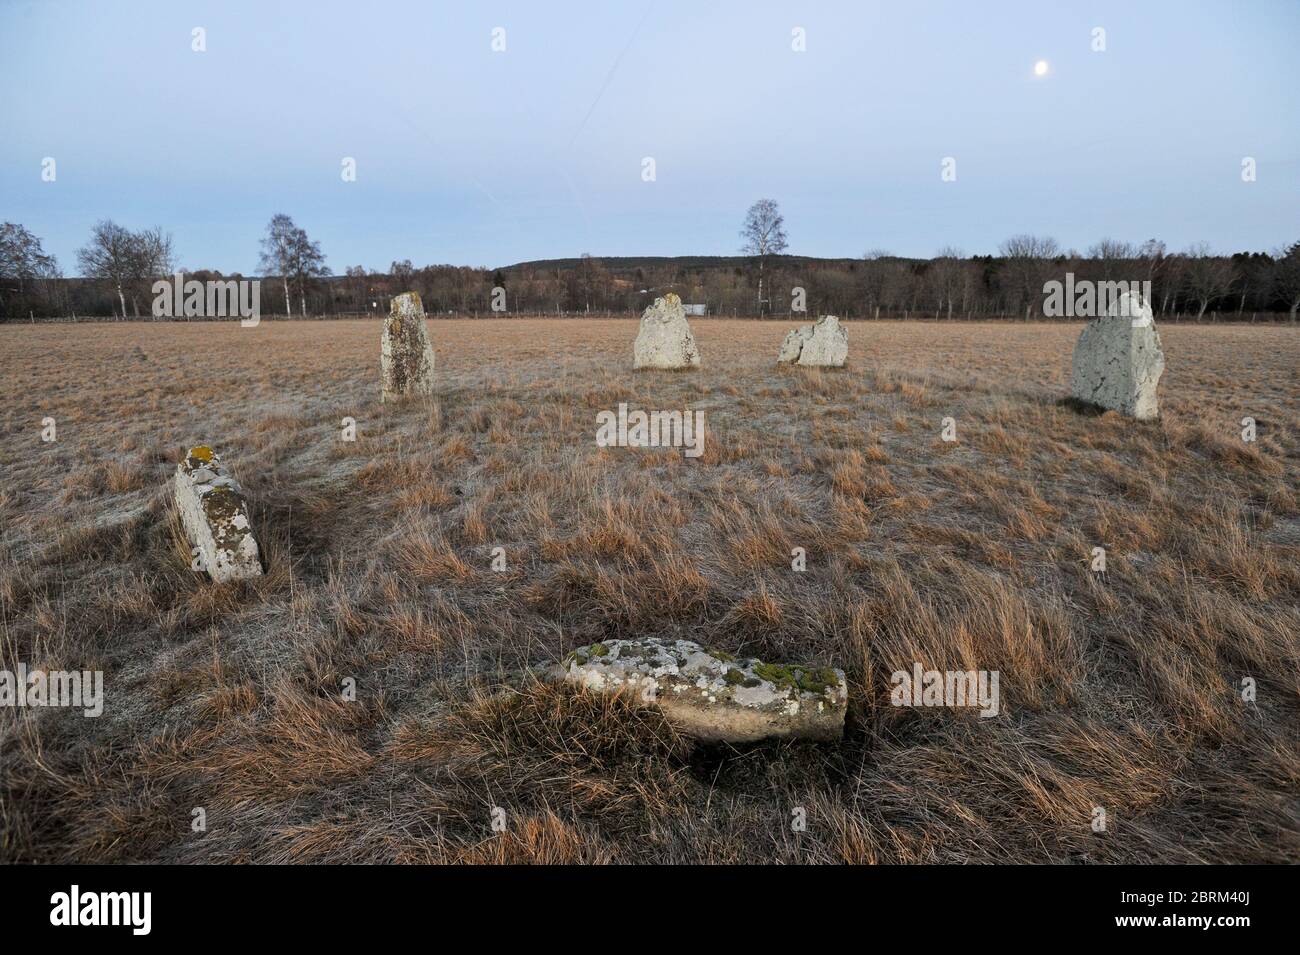 Iron Age stone circle in Ekornavallen ancient burial ground from Neolithic, Bronze Age and Iron Age (3300 BC to 500 BC) in Broddetorp, Västra Götaland Stock Photo